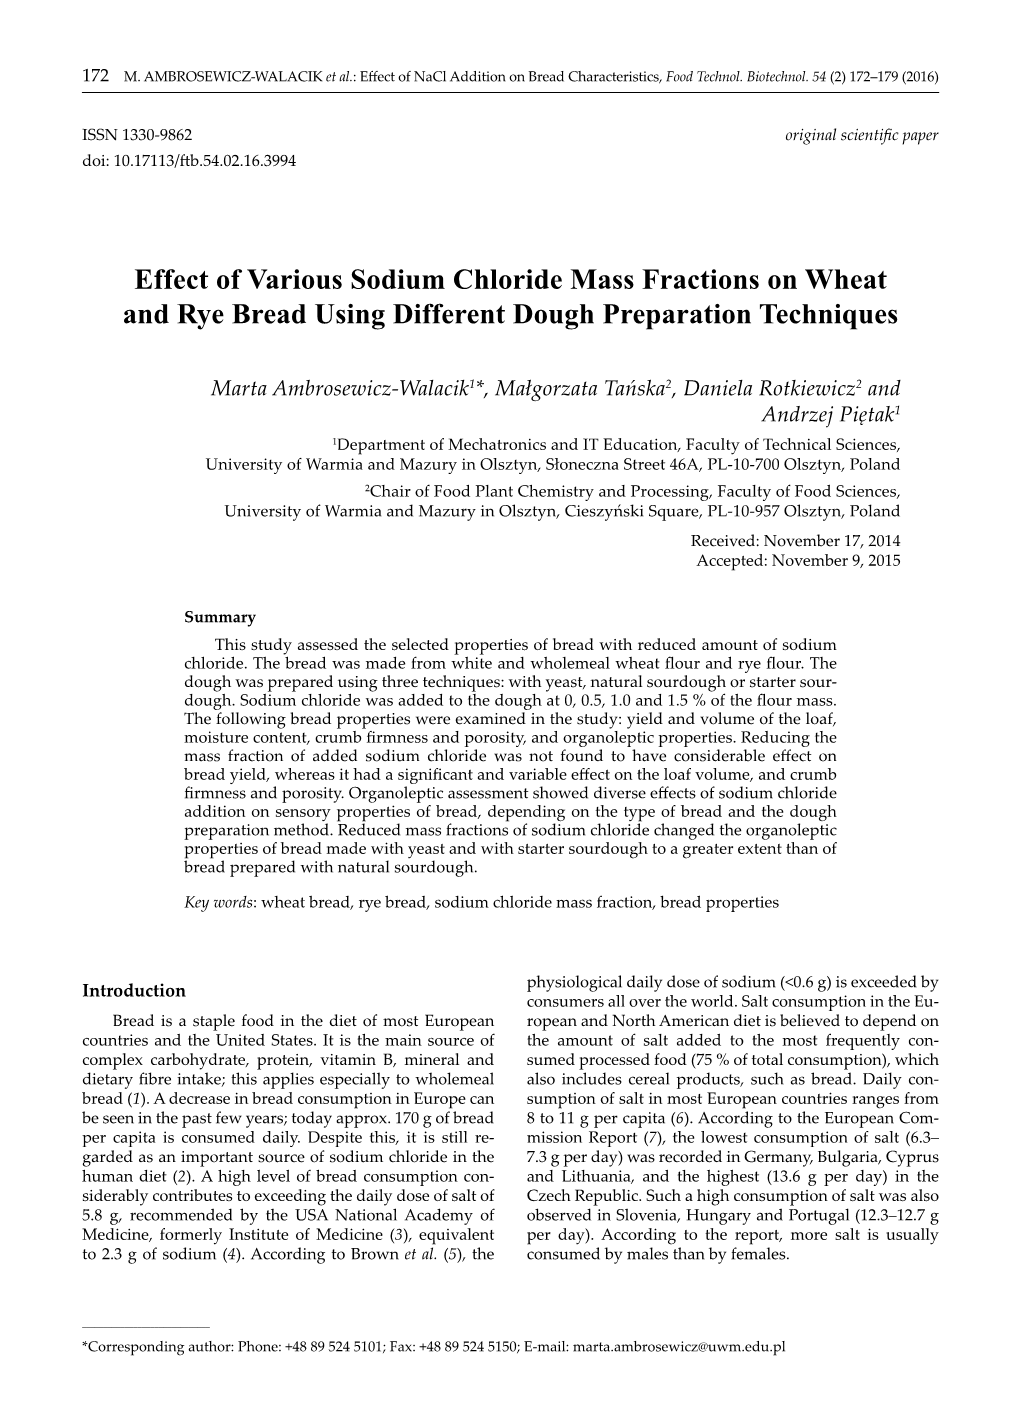 Effect of Various Sodium Chloride Mass Fractions on Wheat and Rye Bread Using Different Dough Preparation Techniques